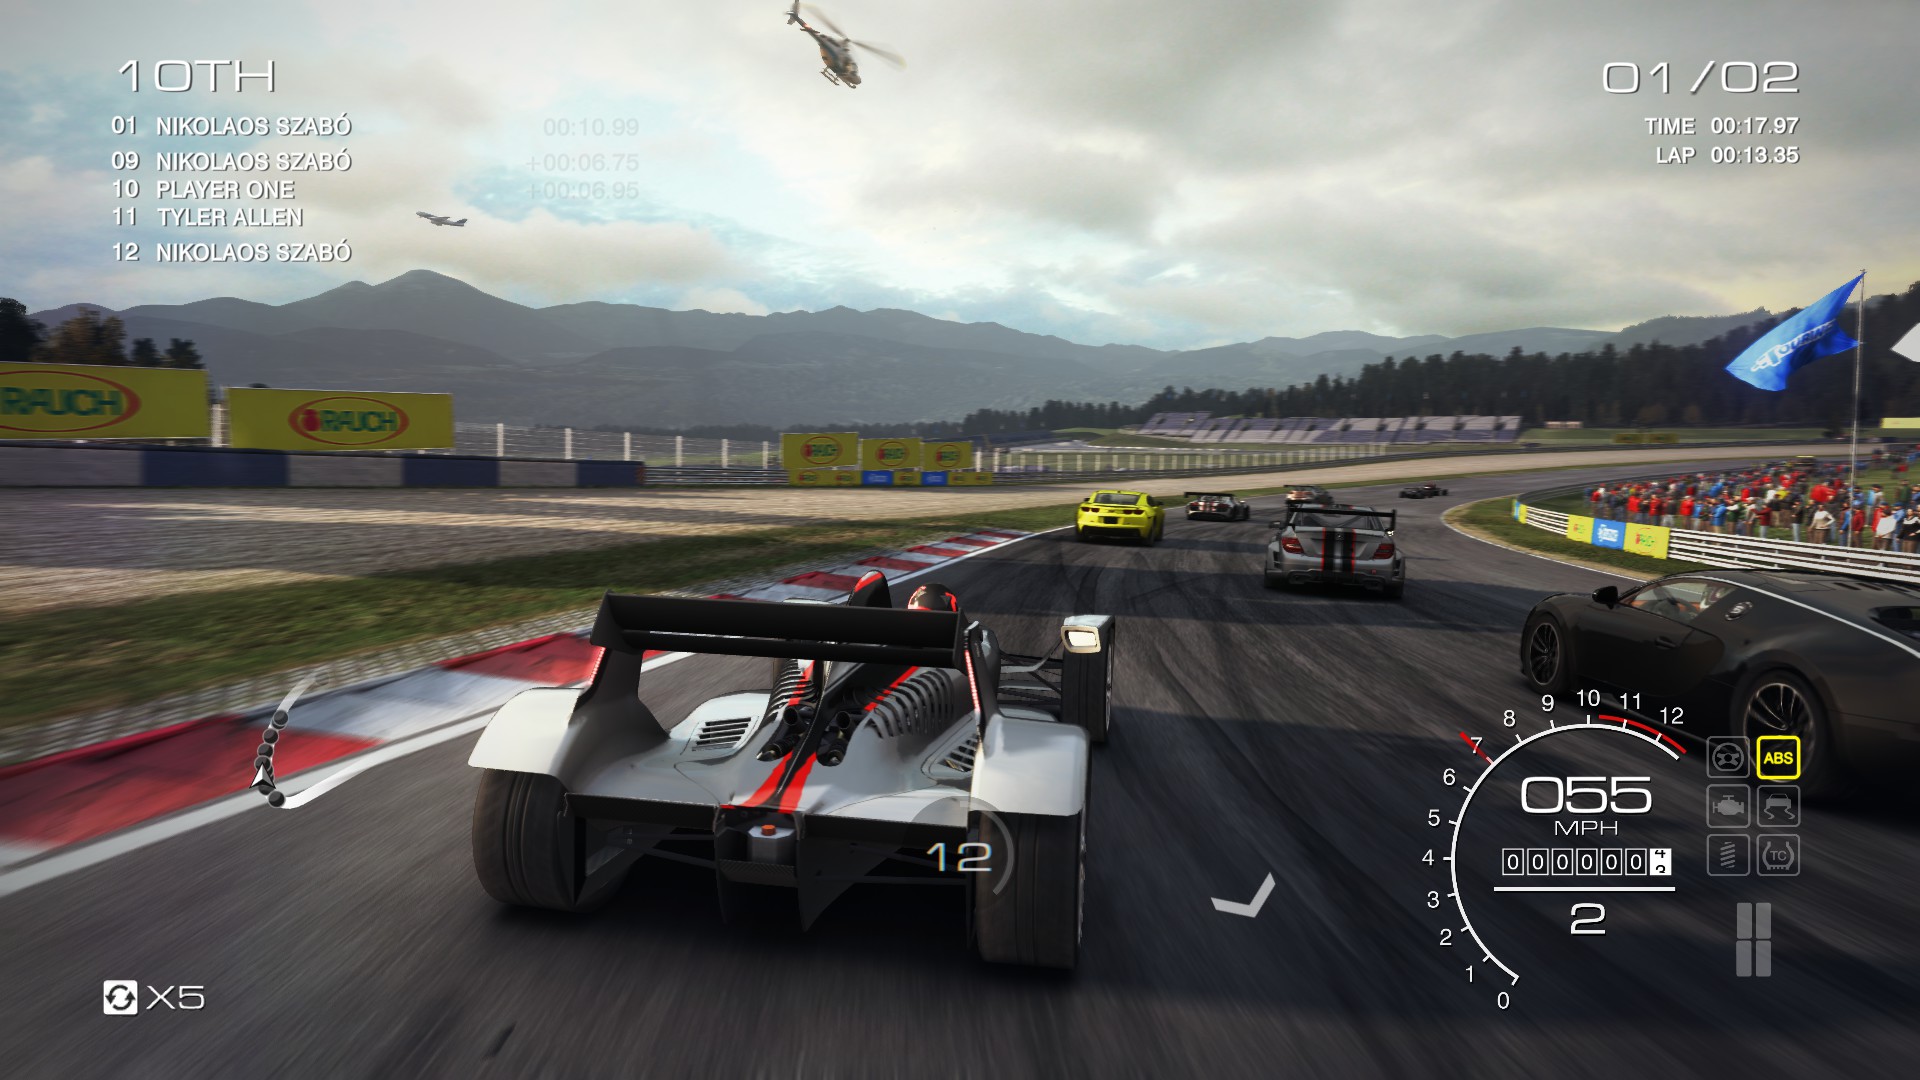 Grid Autosport hands-on preview